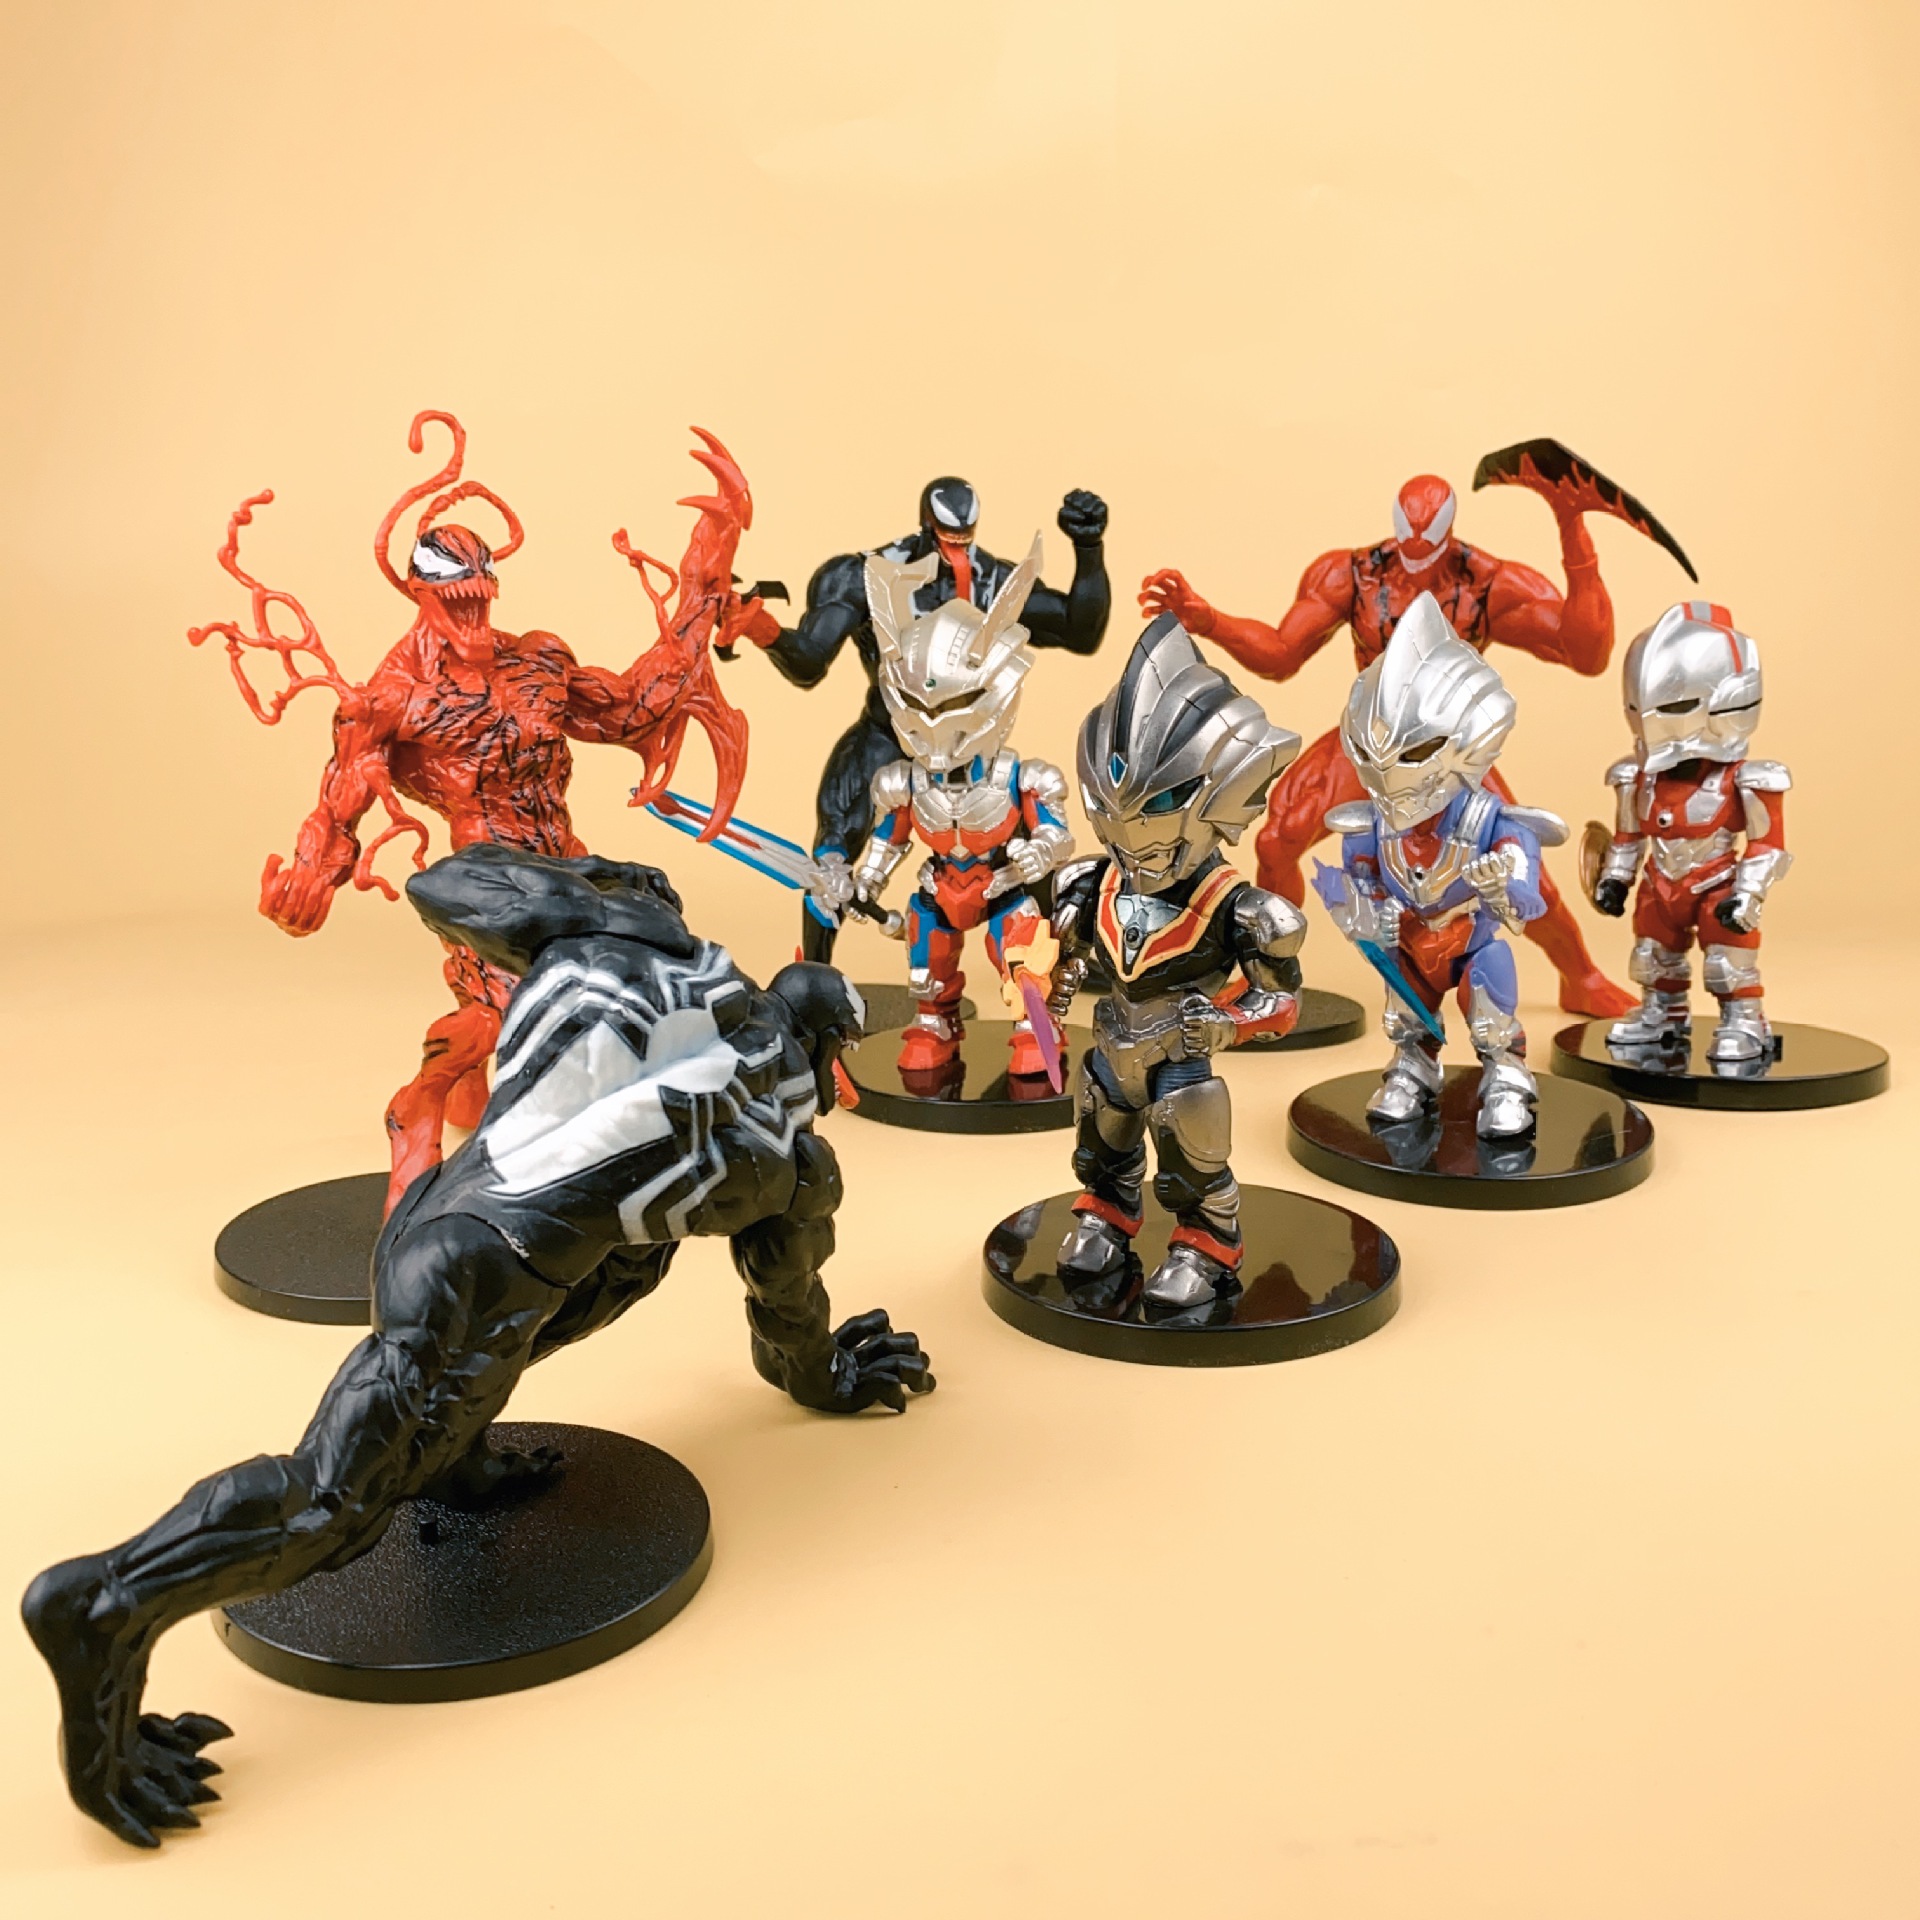 in Stock and Fast Delivery 4 Poison Marvel Heroes War Ultraman Overseas Hot PVC Garage Kits Ornaments Model Wholesale